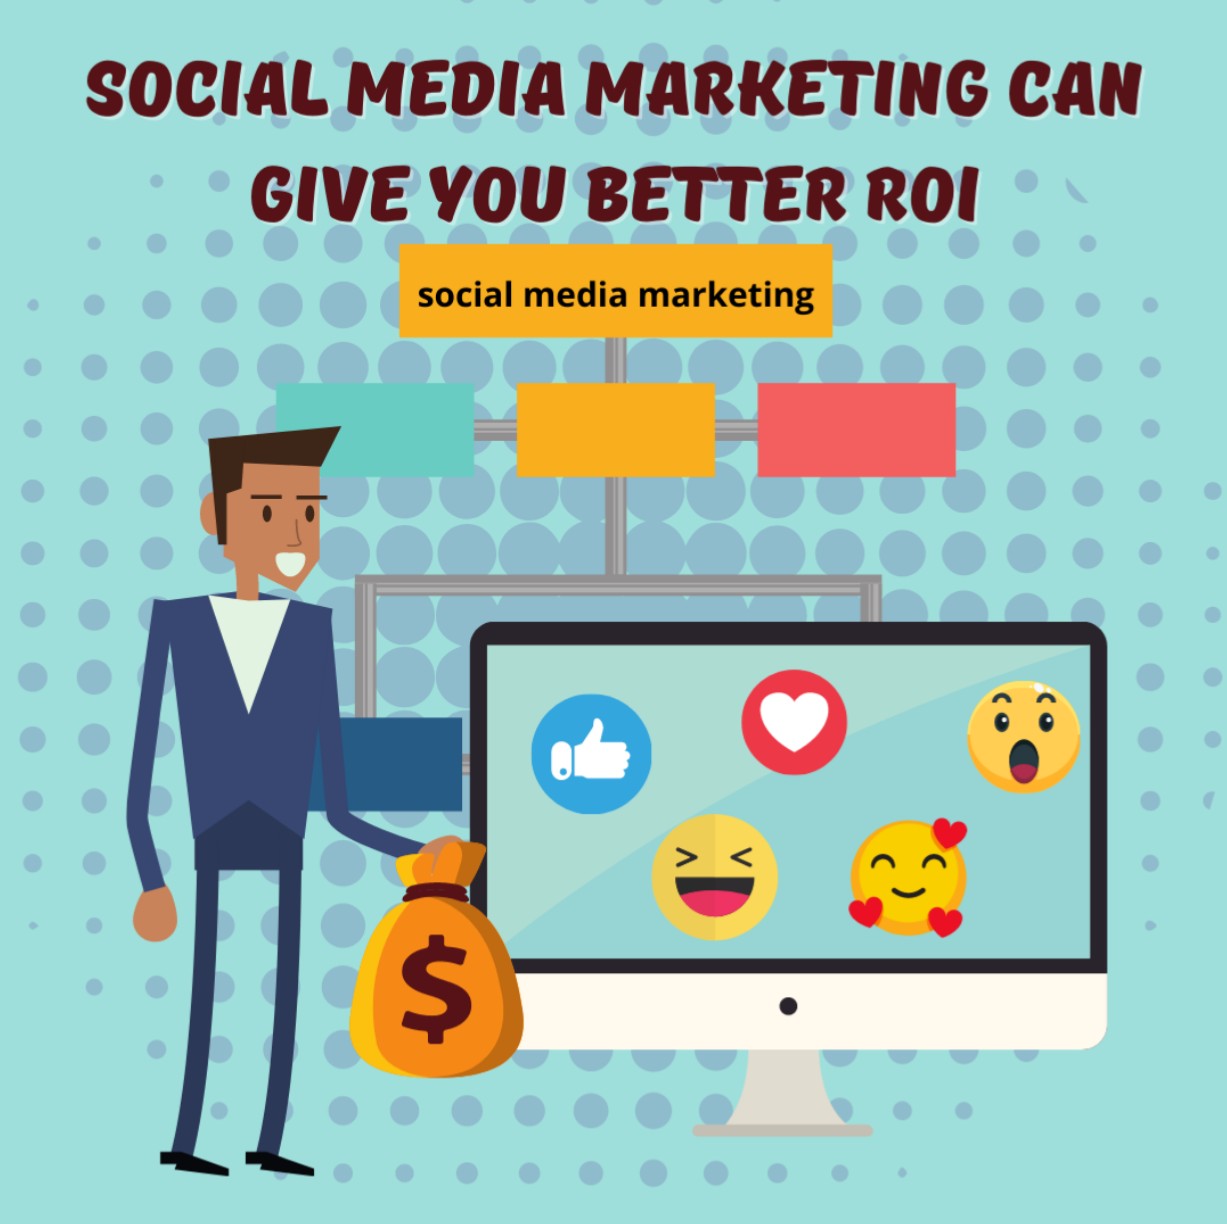 Social media marketing can give you better ROI
